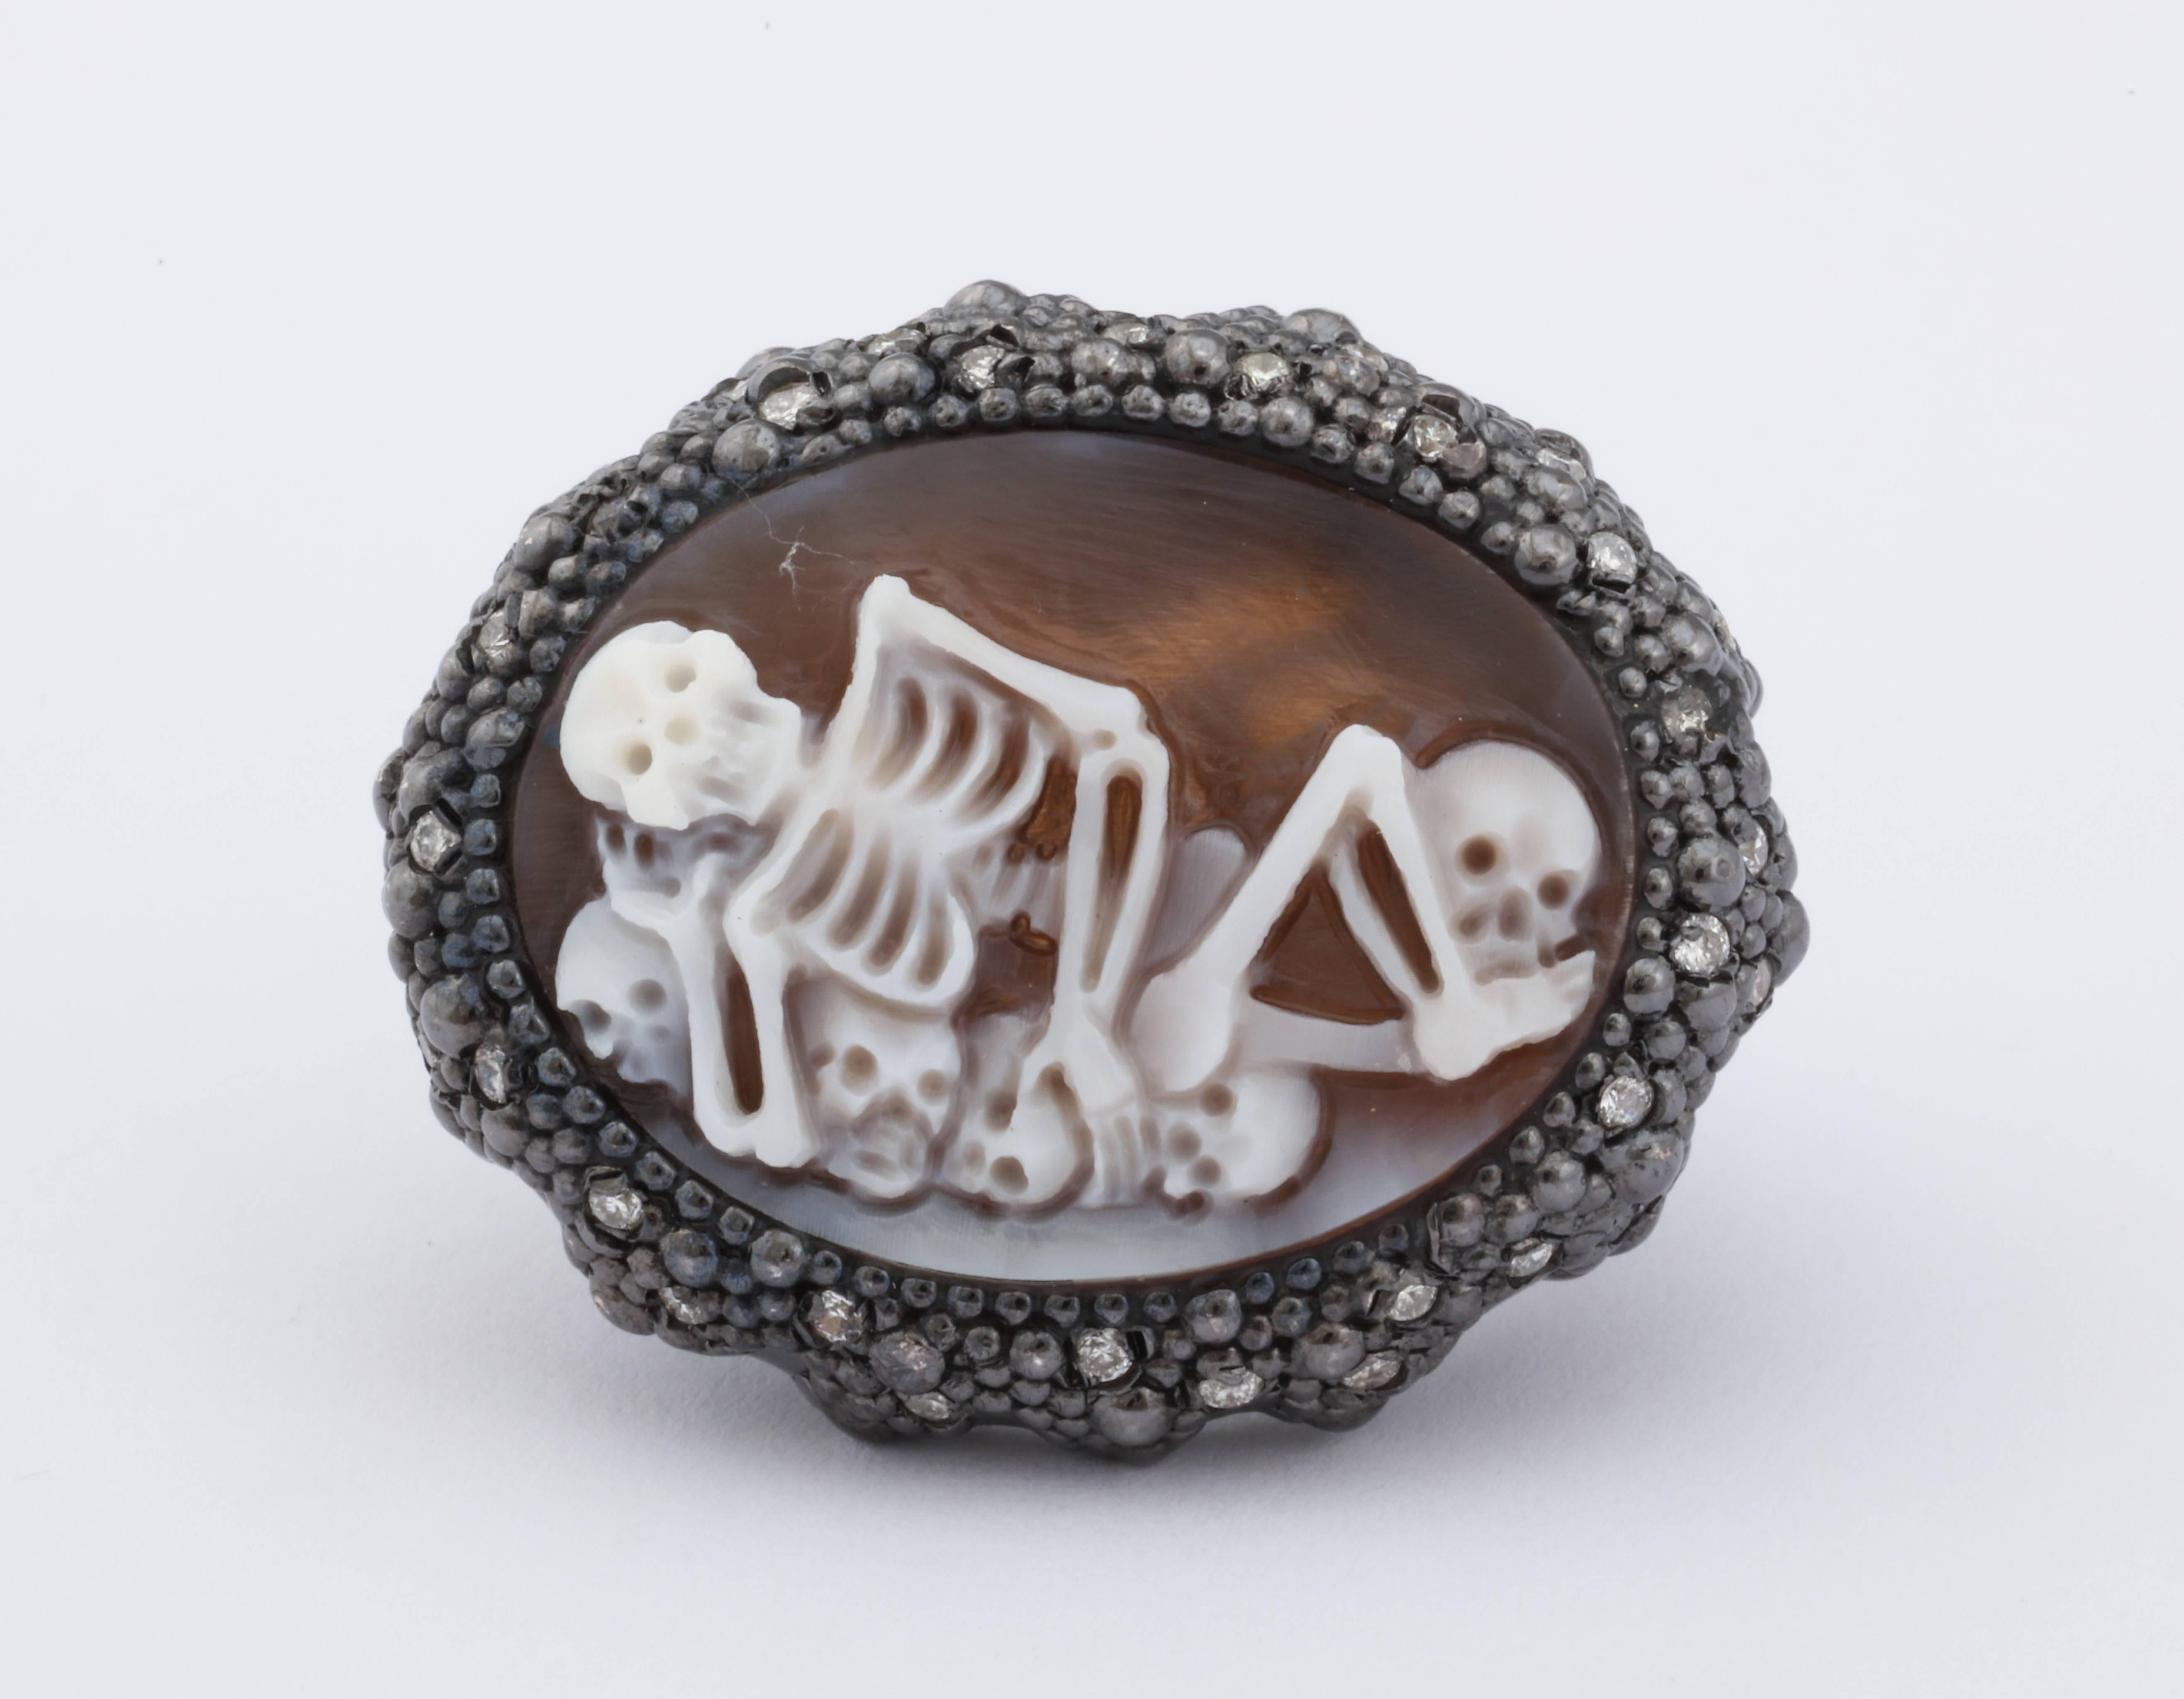 25mm sardonyx shell cameo hand-carved, set in sterling silver black rhodium plated ring with white diamonds.
Ring Size: US6

*Being these are hand crafted one of a kind designs, not all ring sizes might be immediately available. We offer custom